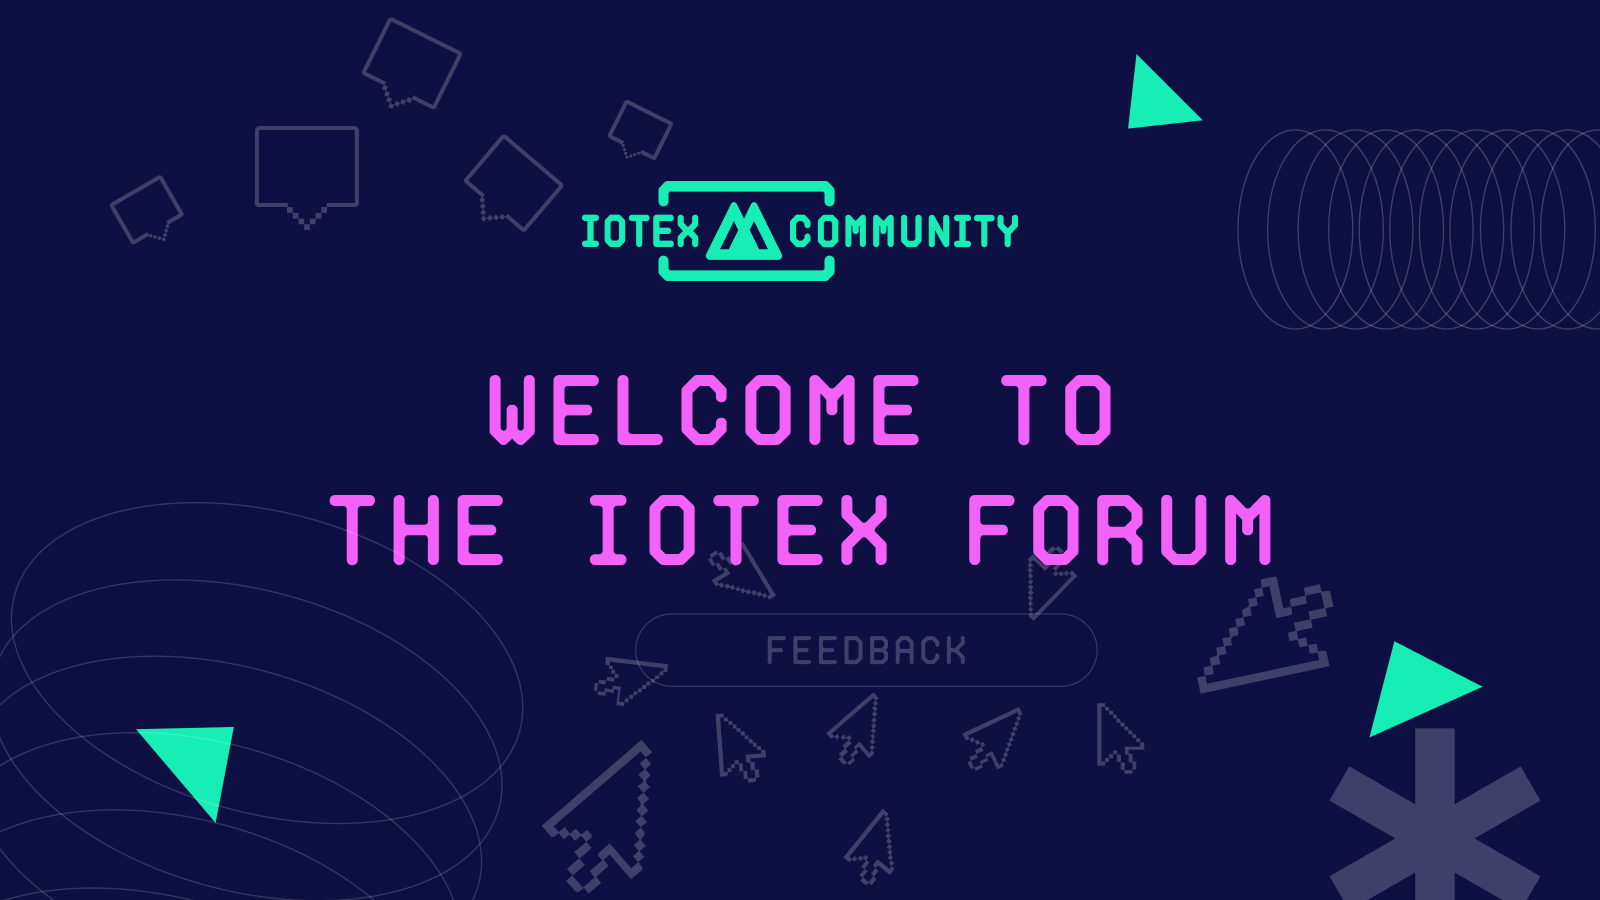 Welcome to the IoTeX Forum